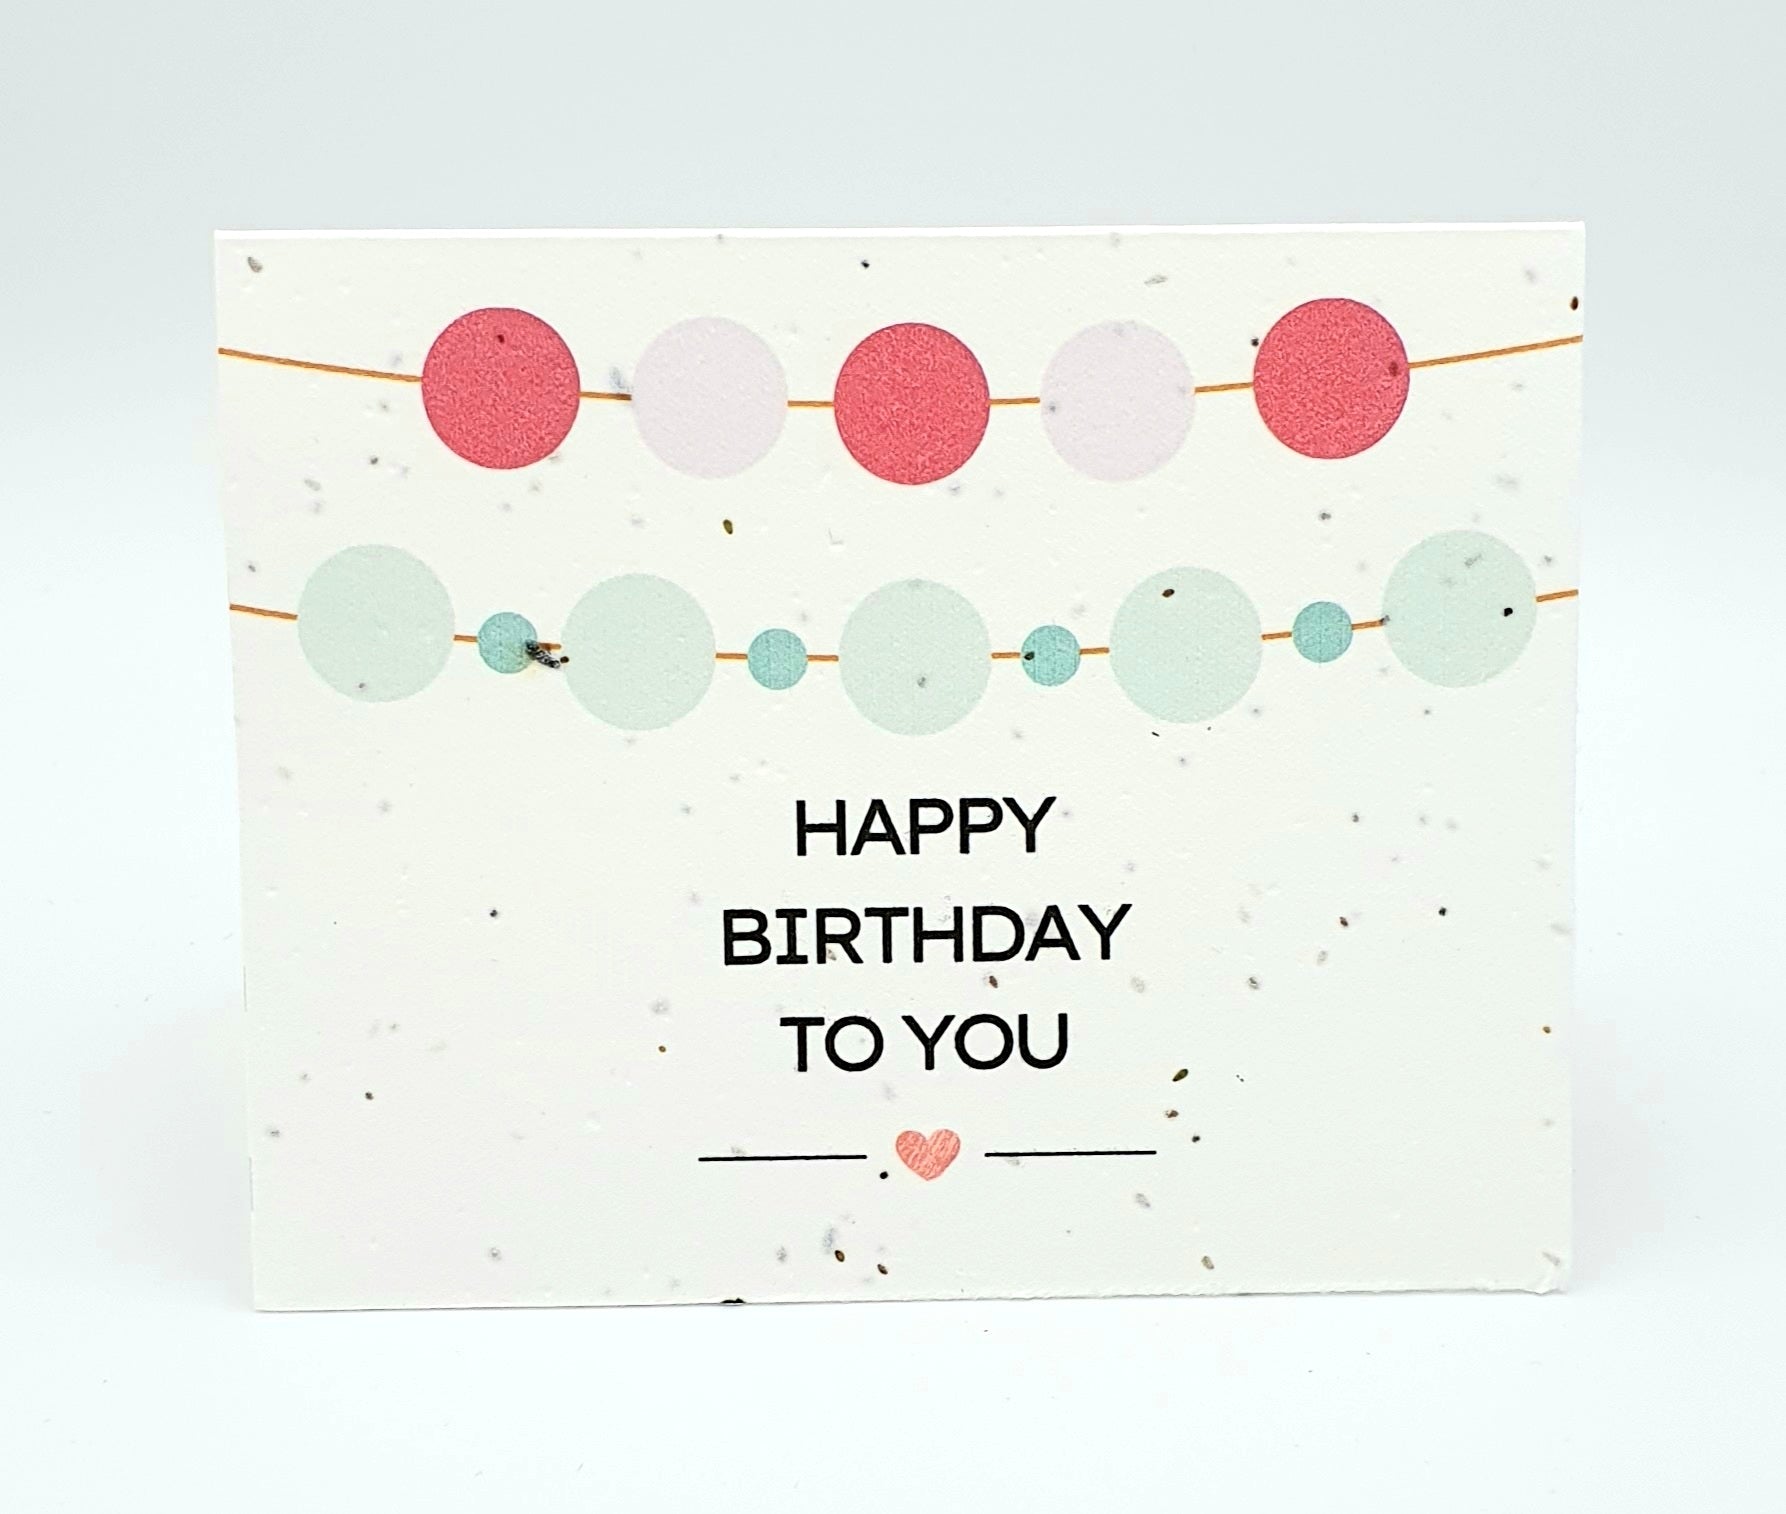 Plantable seed card with "Happy Birthday to you" and round banners.